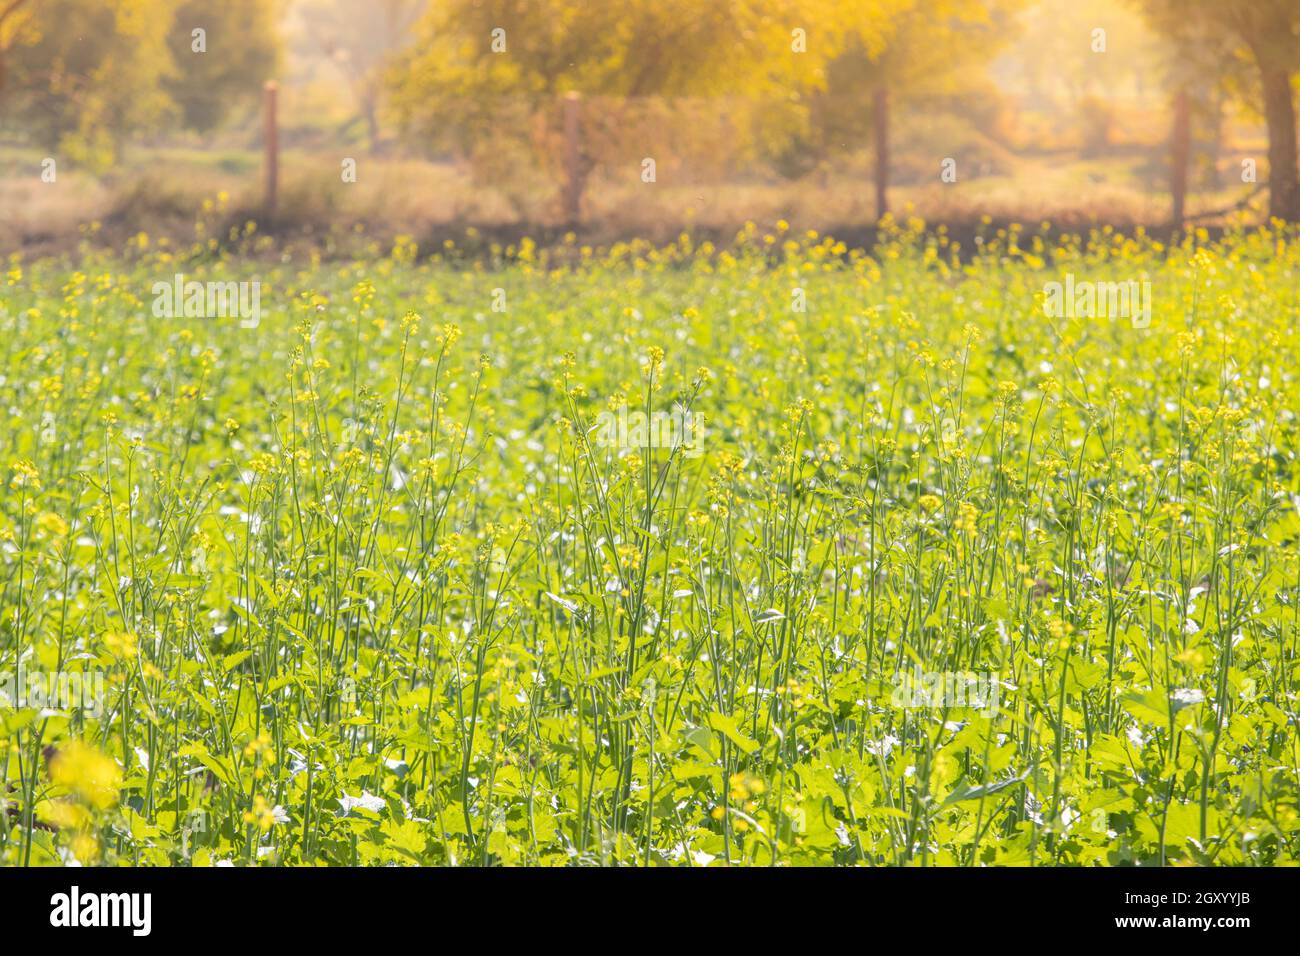 Close-up of Mustard crop growing in mustard field in rural area of India with creative light effect blur background of nature Stock Photo